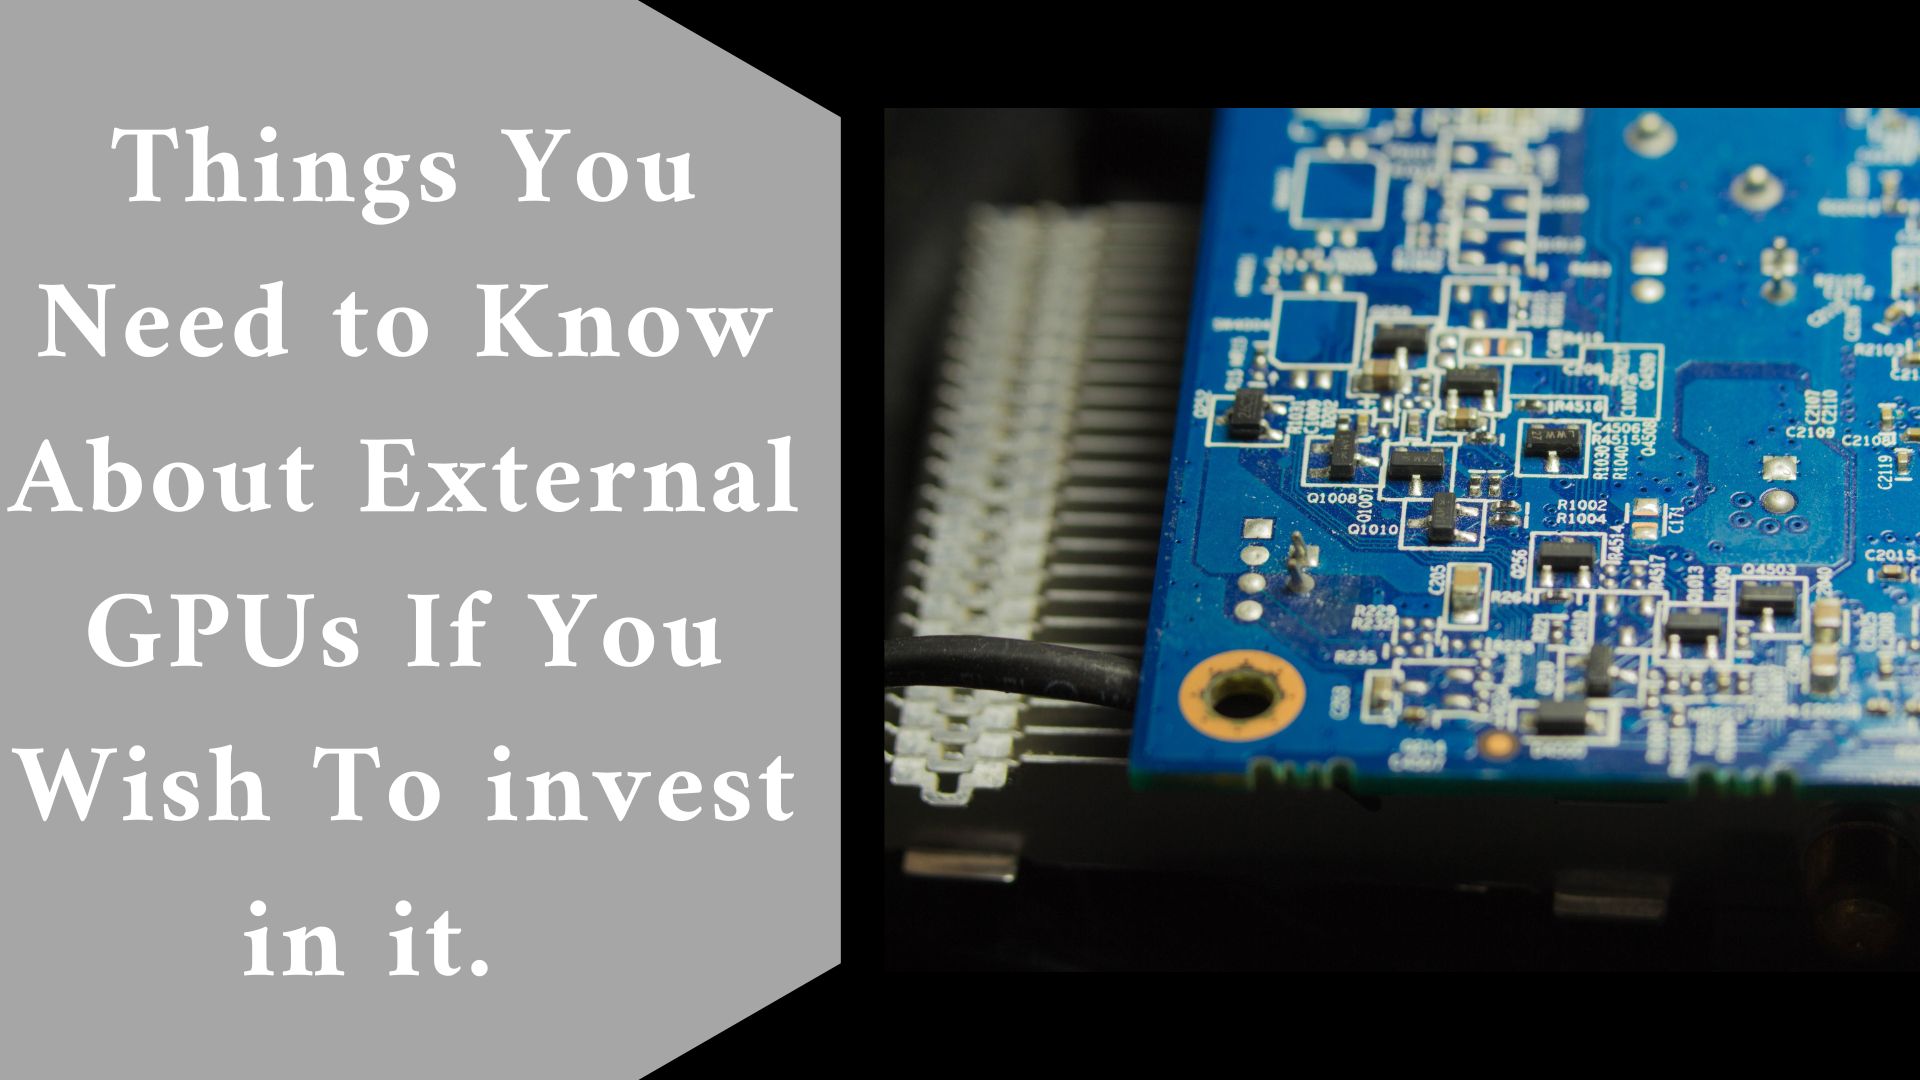 Things You Need to Know About External GPUs If You Wish To invest in it.